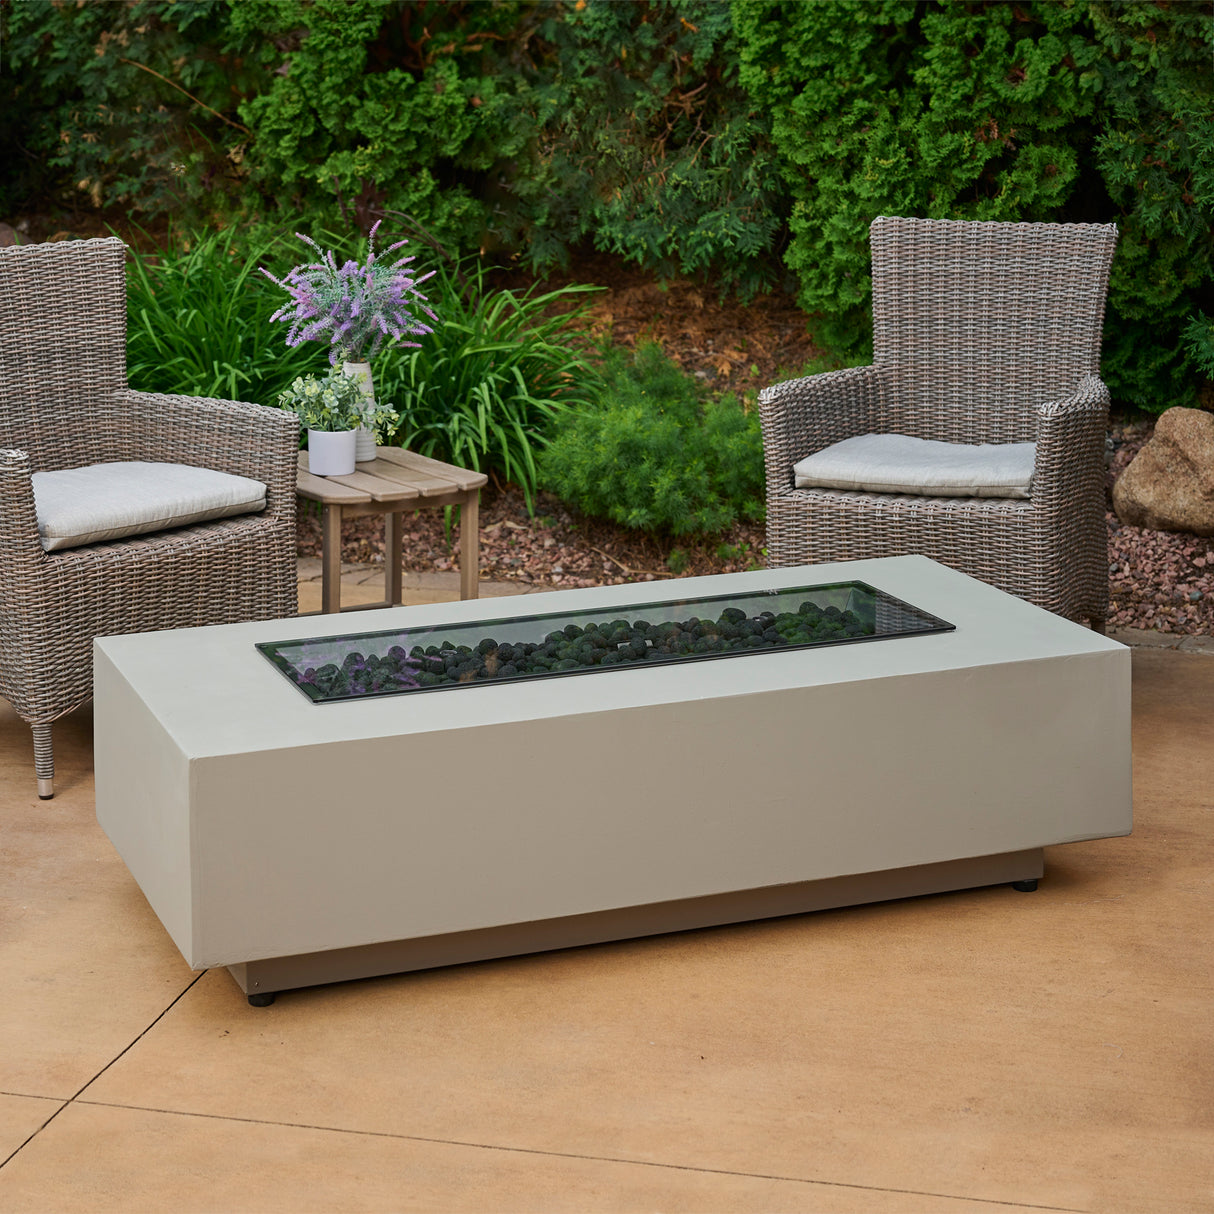 The Harbor View Rectangular Gas Fire Pit Table on a patio setting with a glass cover over the burner